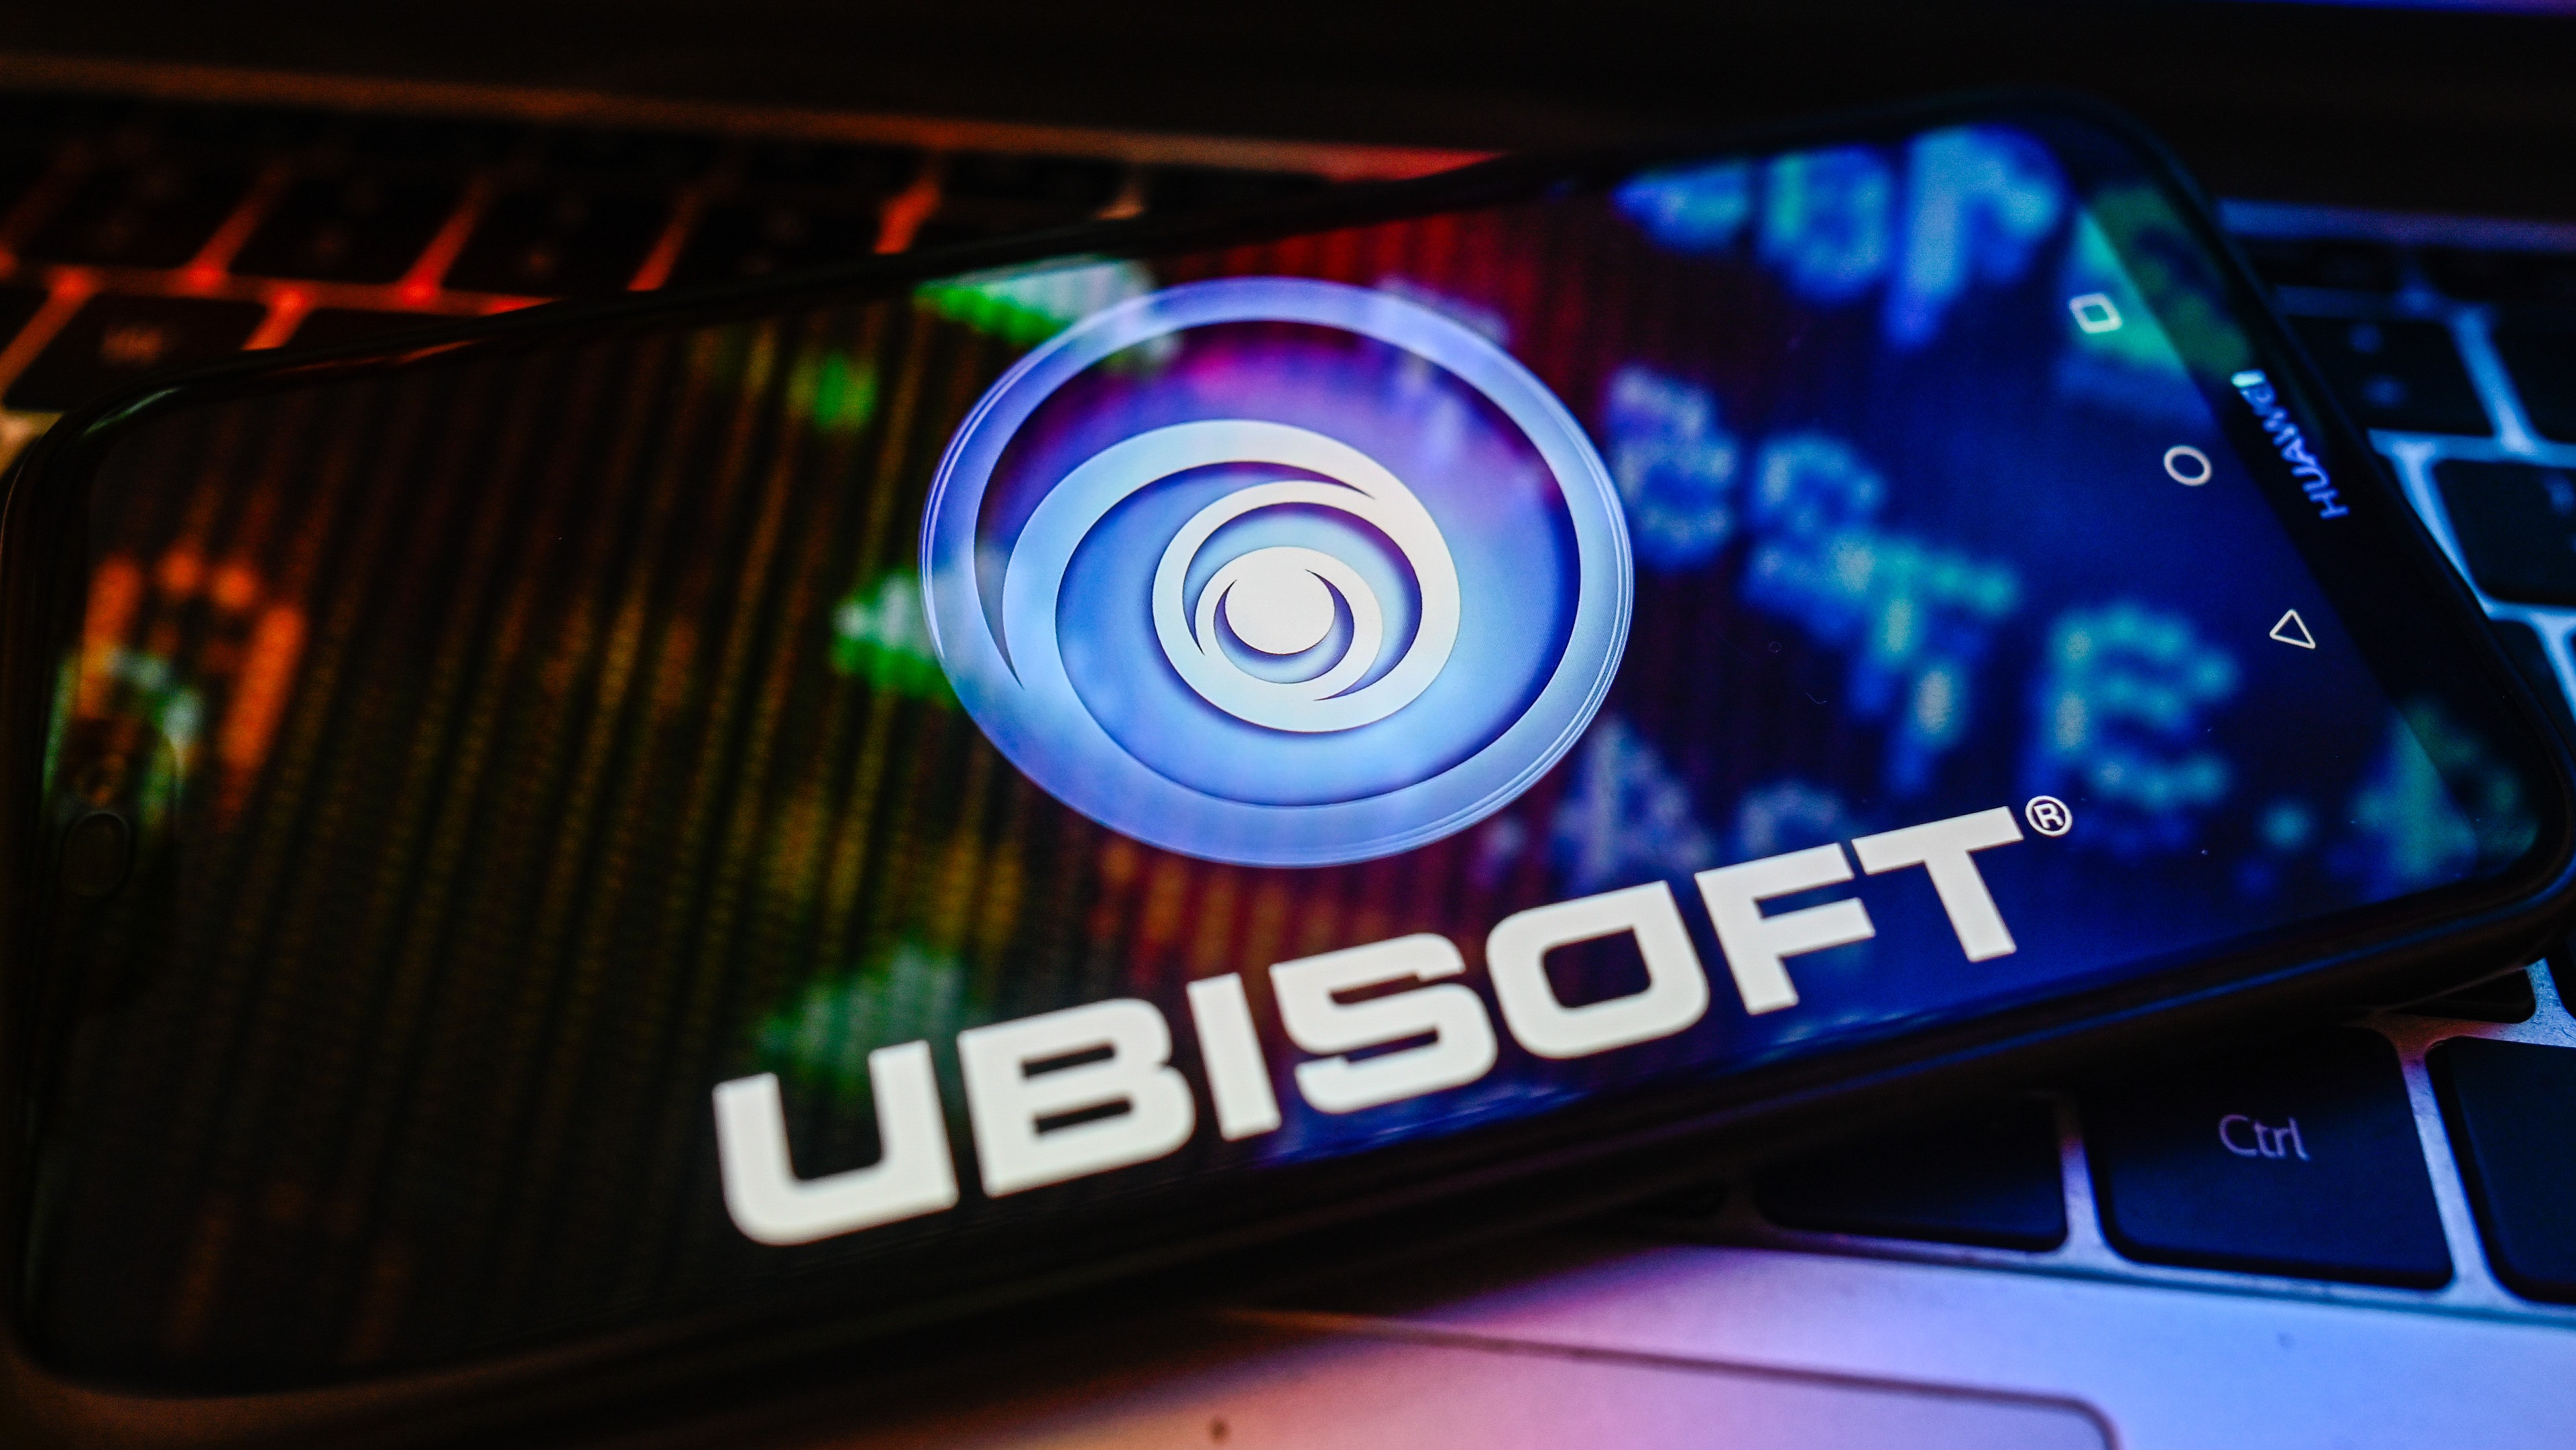  Ubisoft is on the NFT sauce again: A new partnership with Web3 platform Immutable aims to create 'a fresh new experience that players will love' 